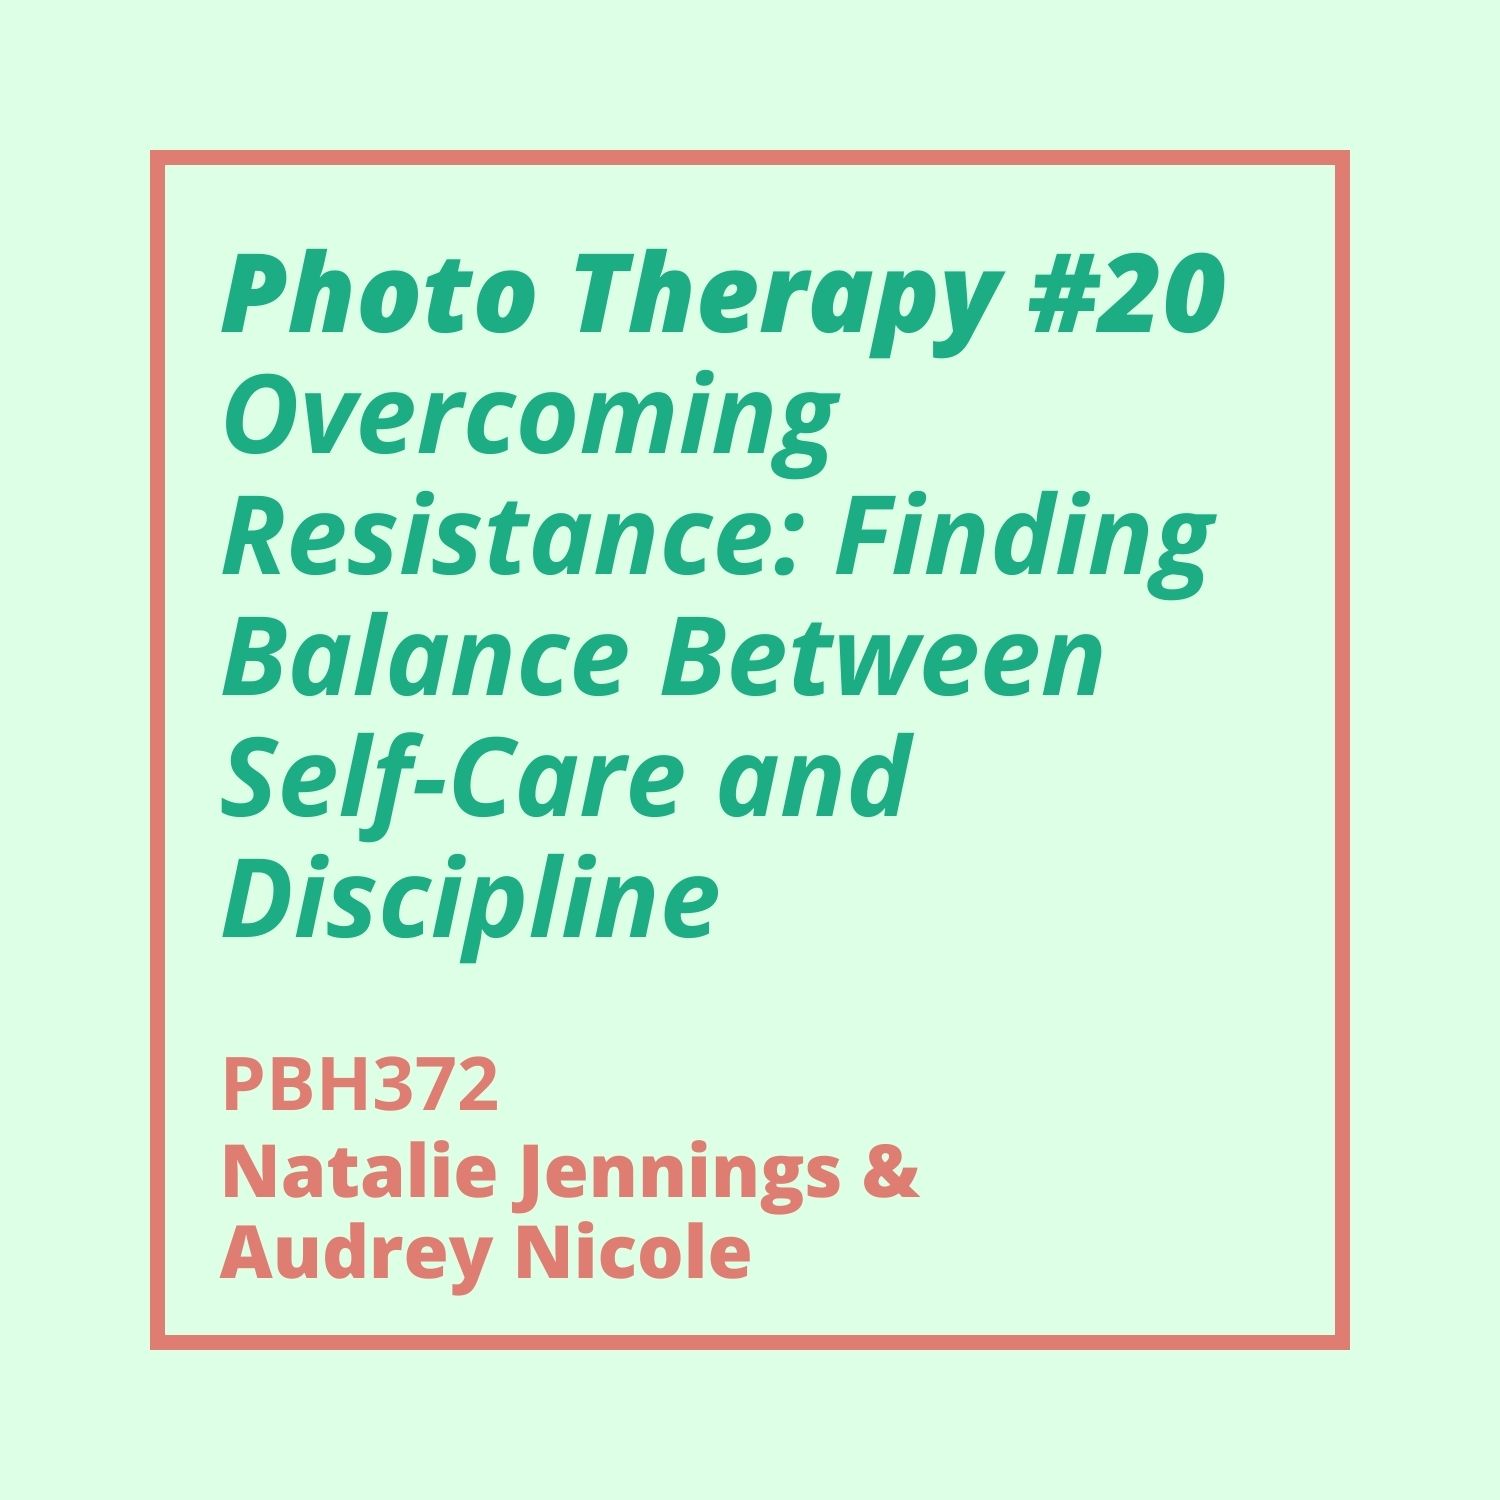 372: Photo Therapy #20 - Overcoming Resistance: Finding Balance Between Self-Care and Discipline